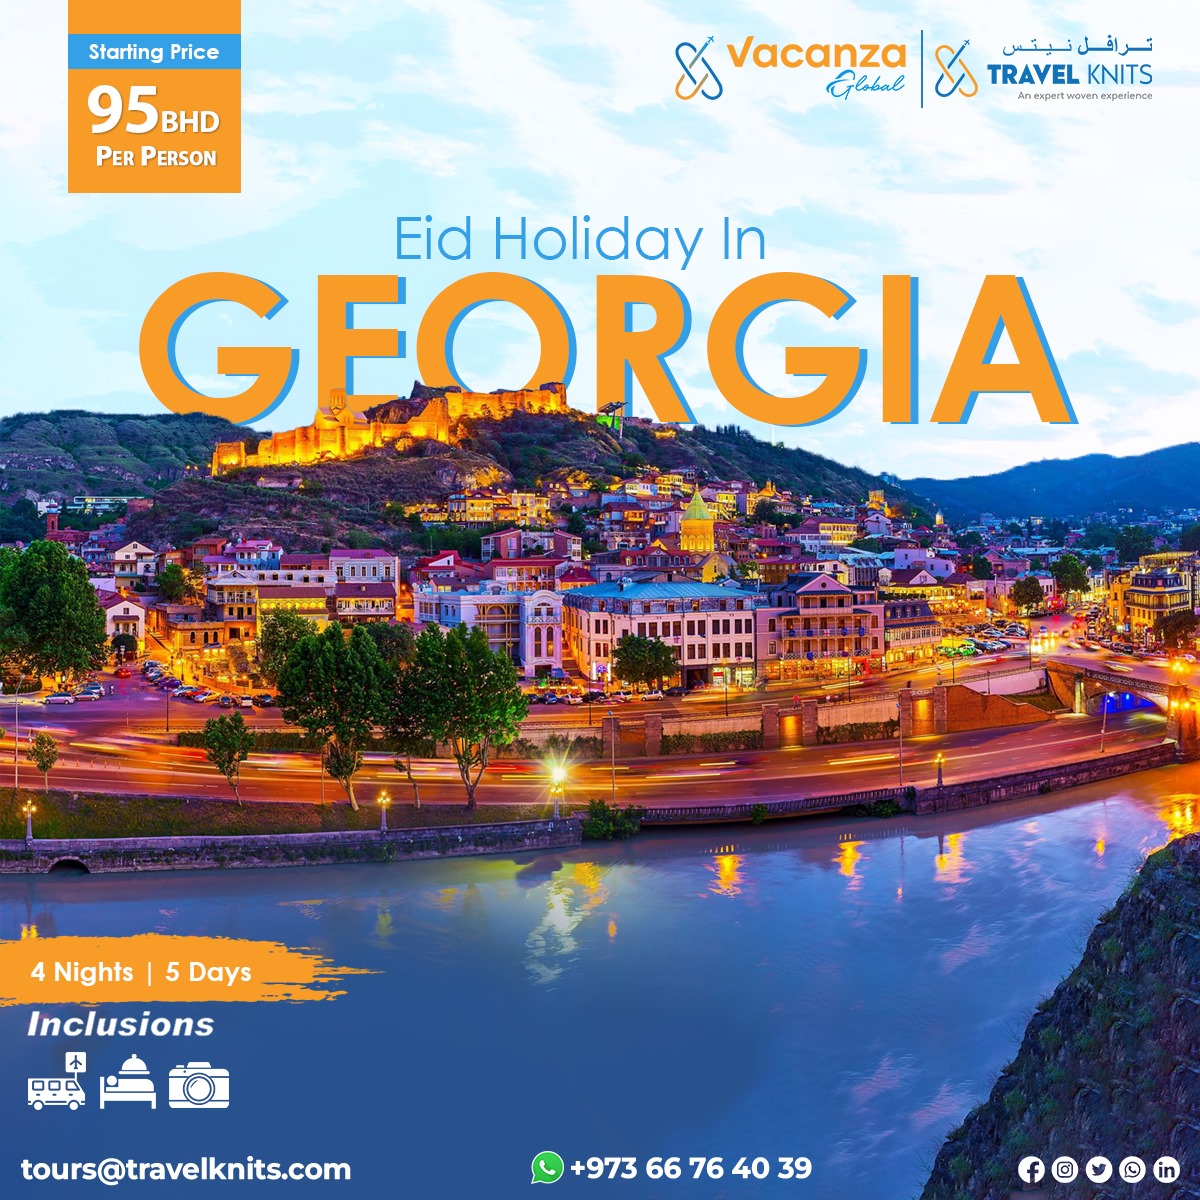 Eid holiday in Georgia|GeorgiaTour Packages - Book honeymoon ,family,adventure tour packages to Georgia|Travel Knits												